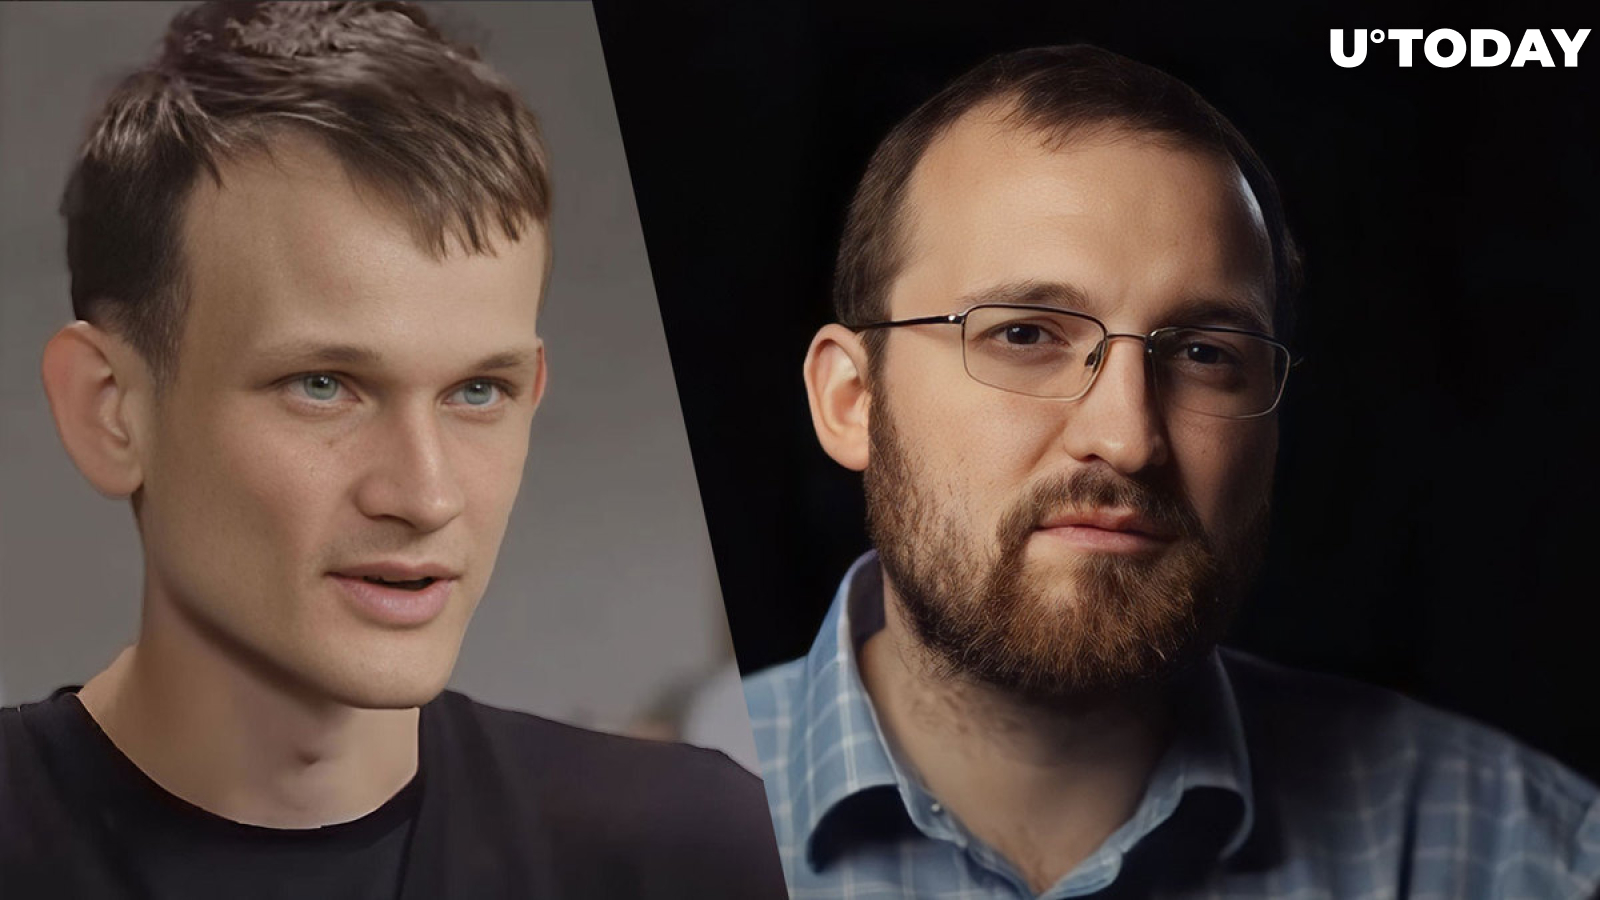 Cardano Creator Responds Seriously to MMA Fight With Vitalik Buterin